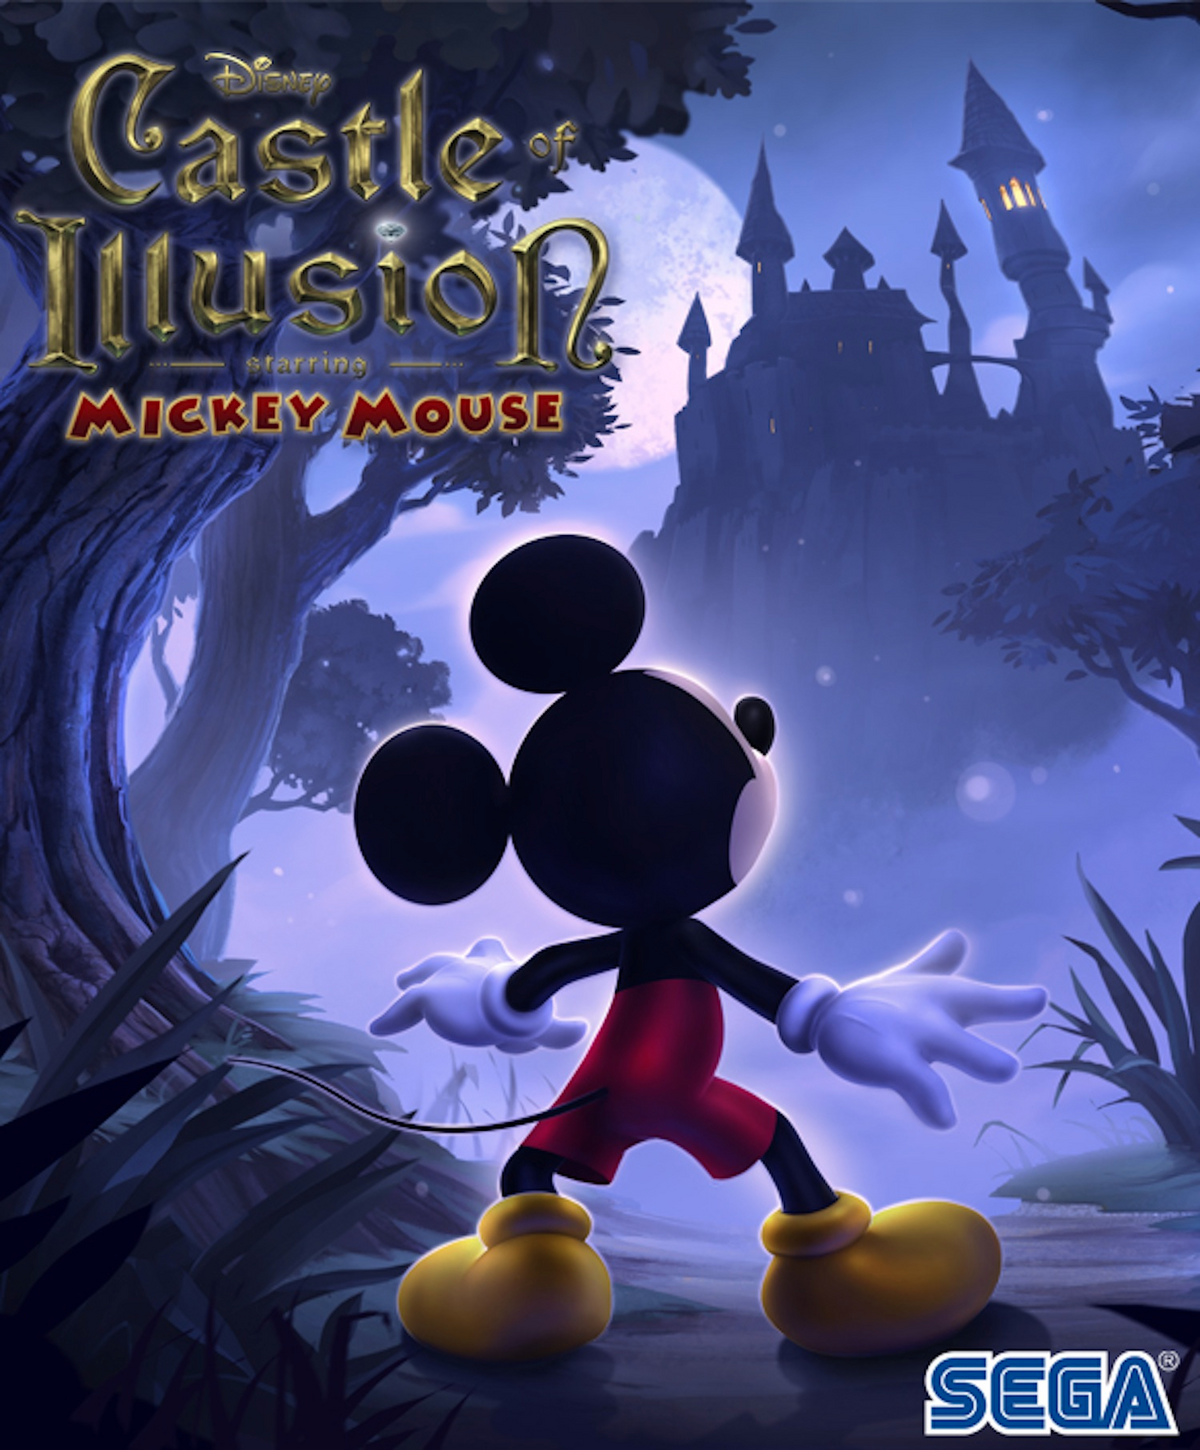 стим castle of illusion starring mickey mouse фото 5